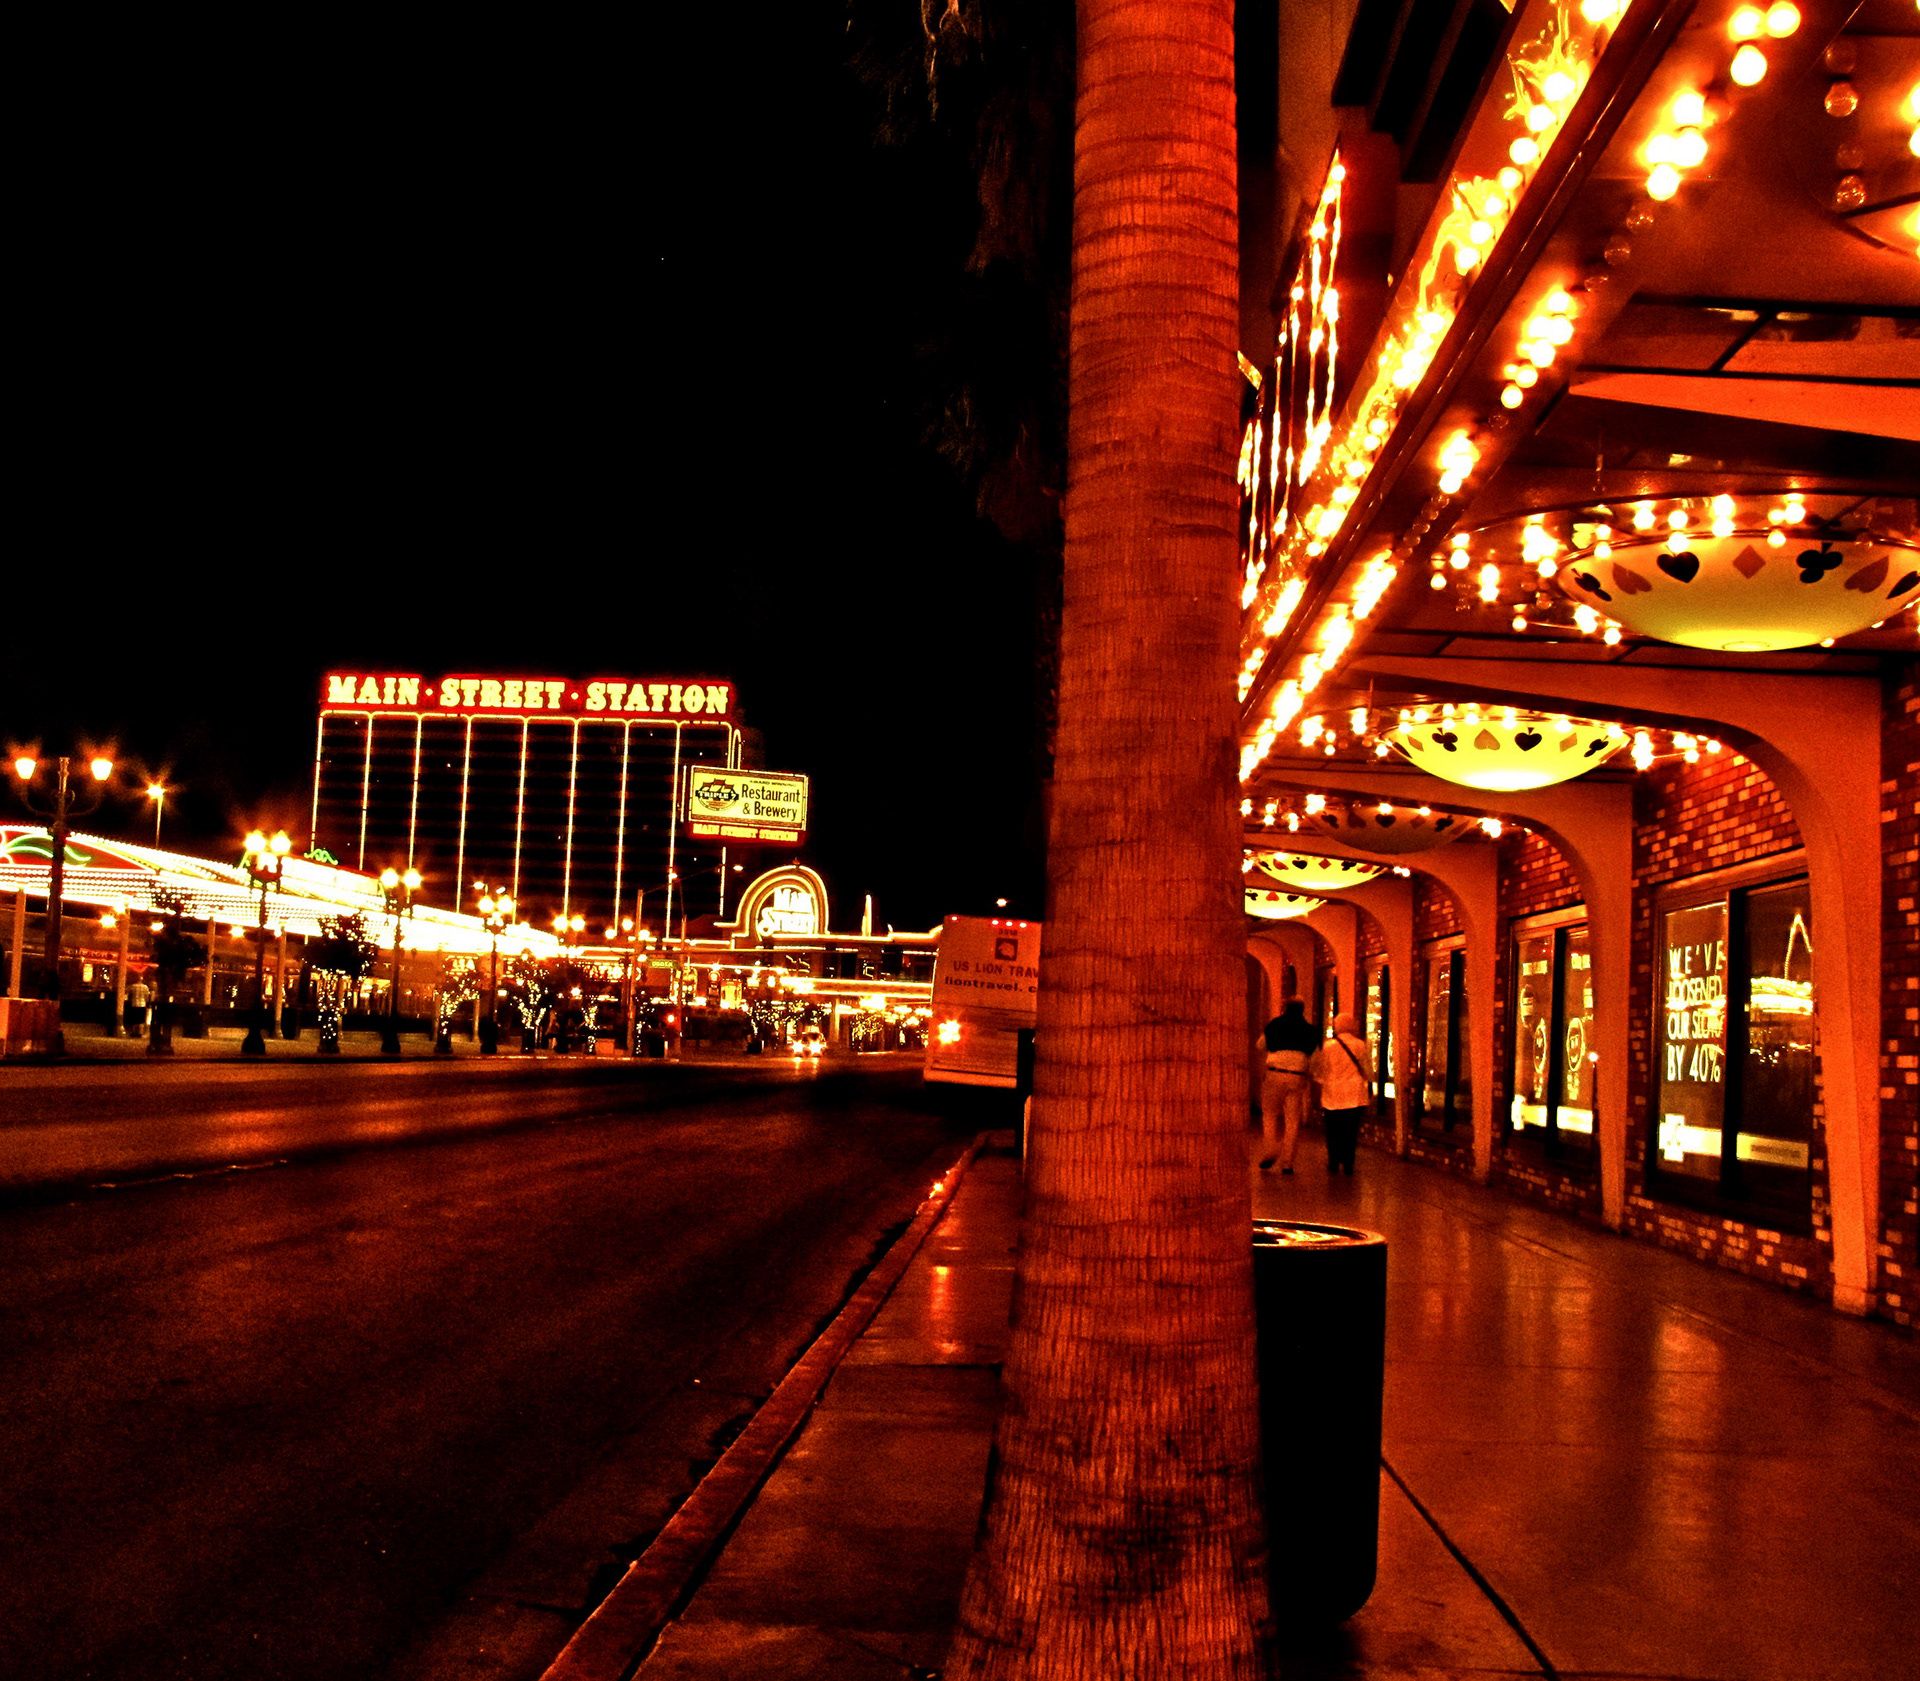 A night time view of Main Street Station with palm trees and street lights. - Las Vegas